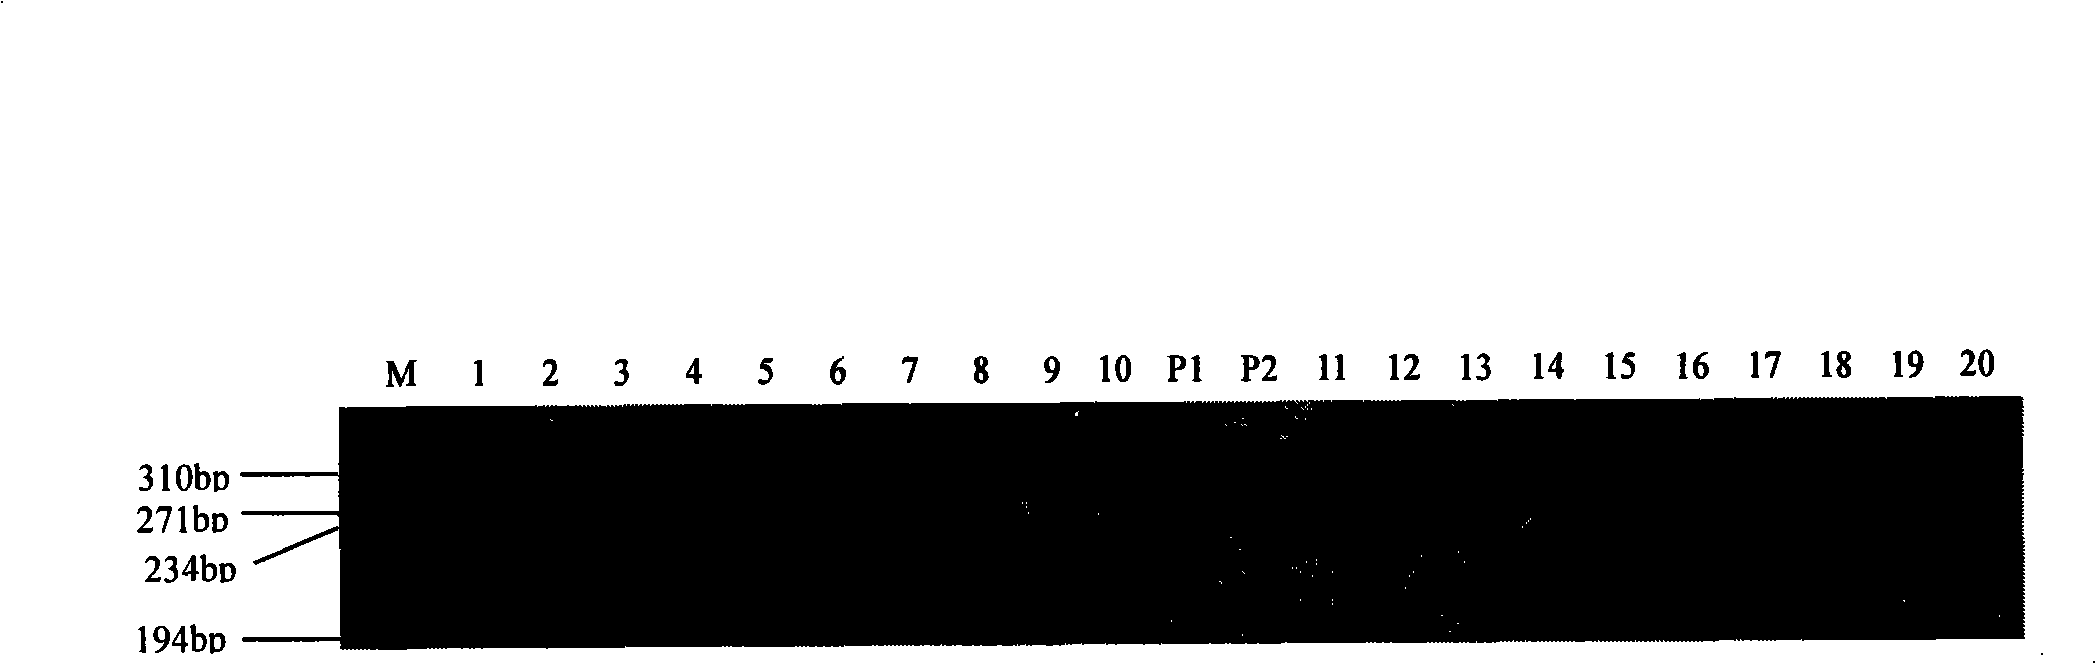 Method for appraising rice fragrance and fragrance character coseparation molecule mark